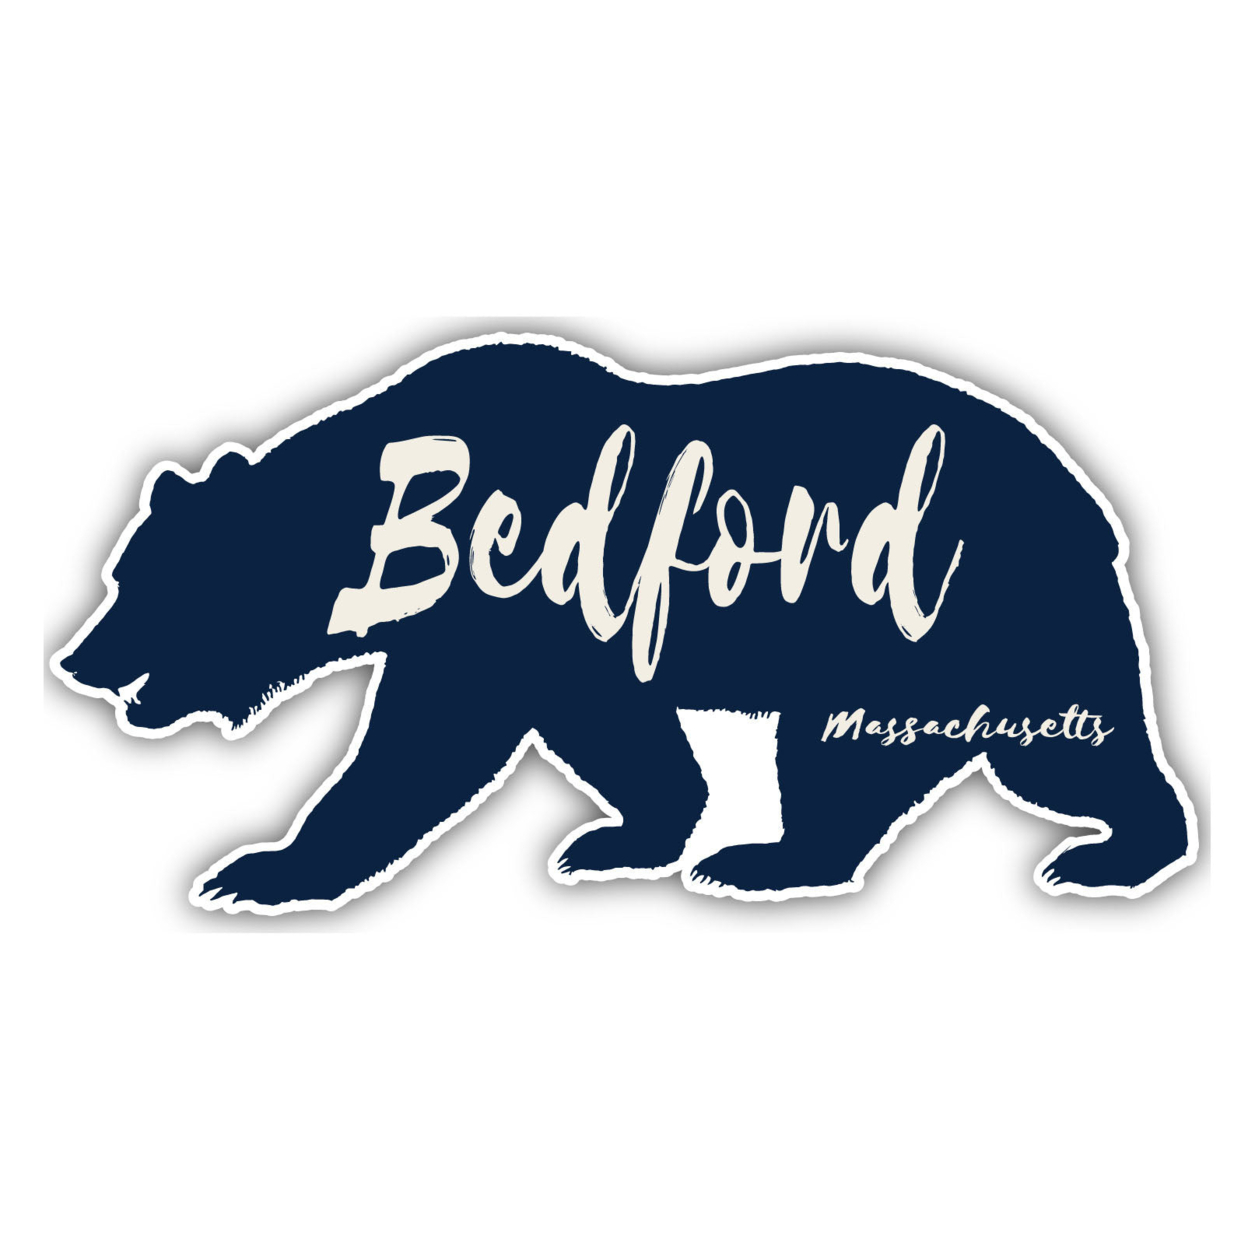 Bedford Massachusetts Souvenir Decorative Stickers (Choose Theme And Size) - 4-Pack, 8-Inch, Bear